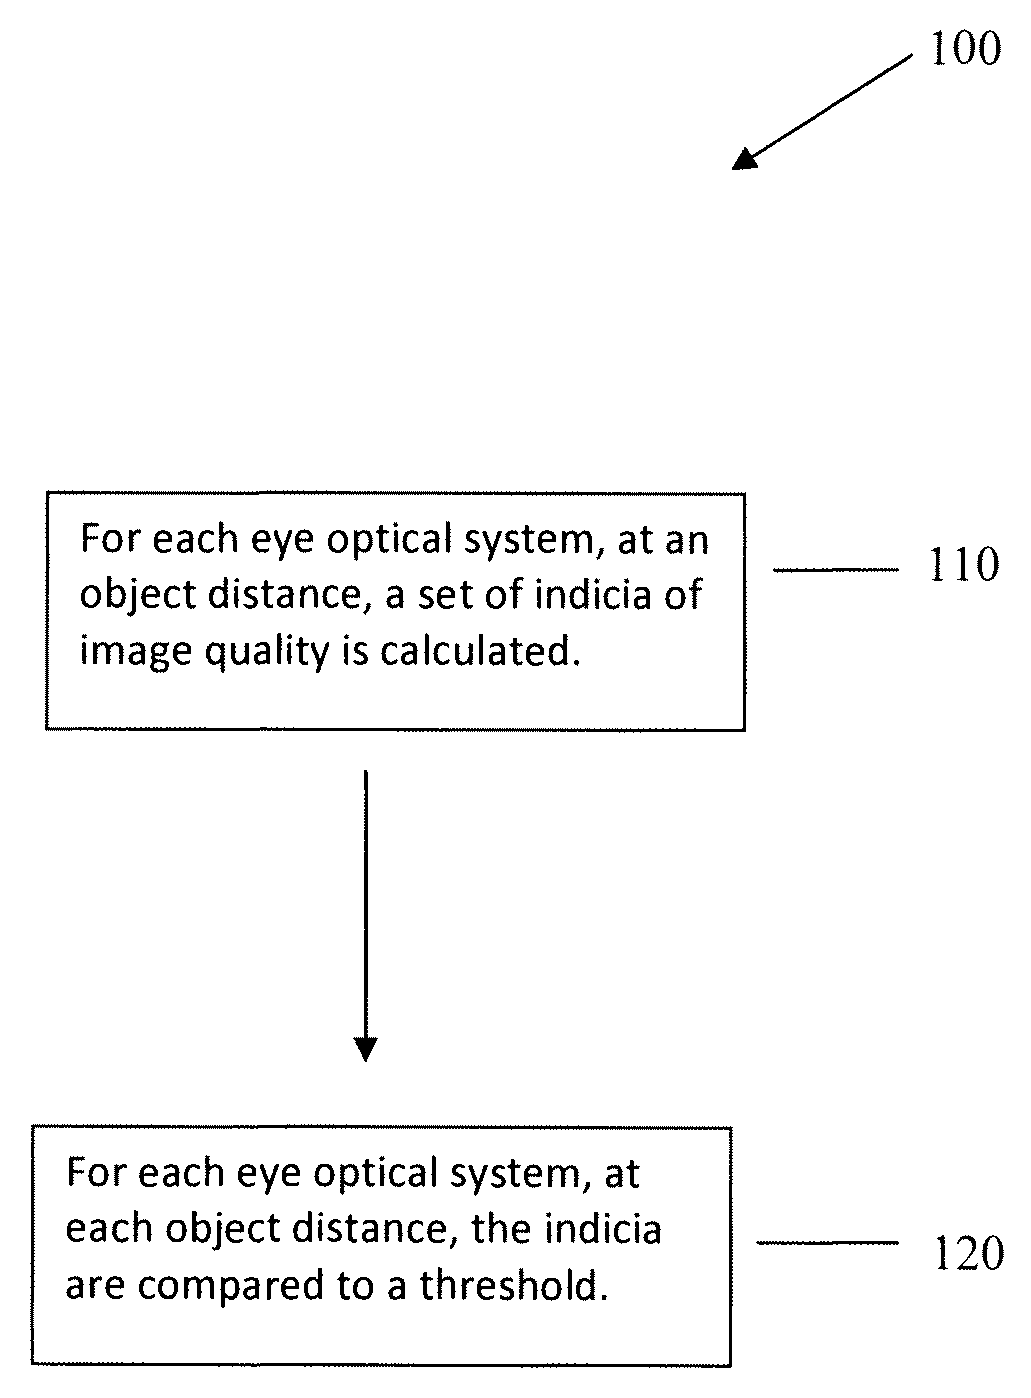 System and method of calculating visual performance of an ophthalmic optical correction using simulation of imaging by a population of eye optical systems